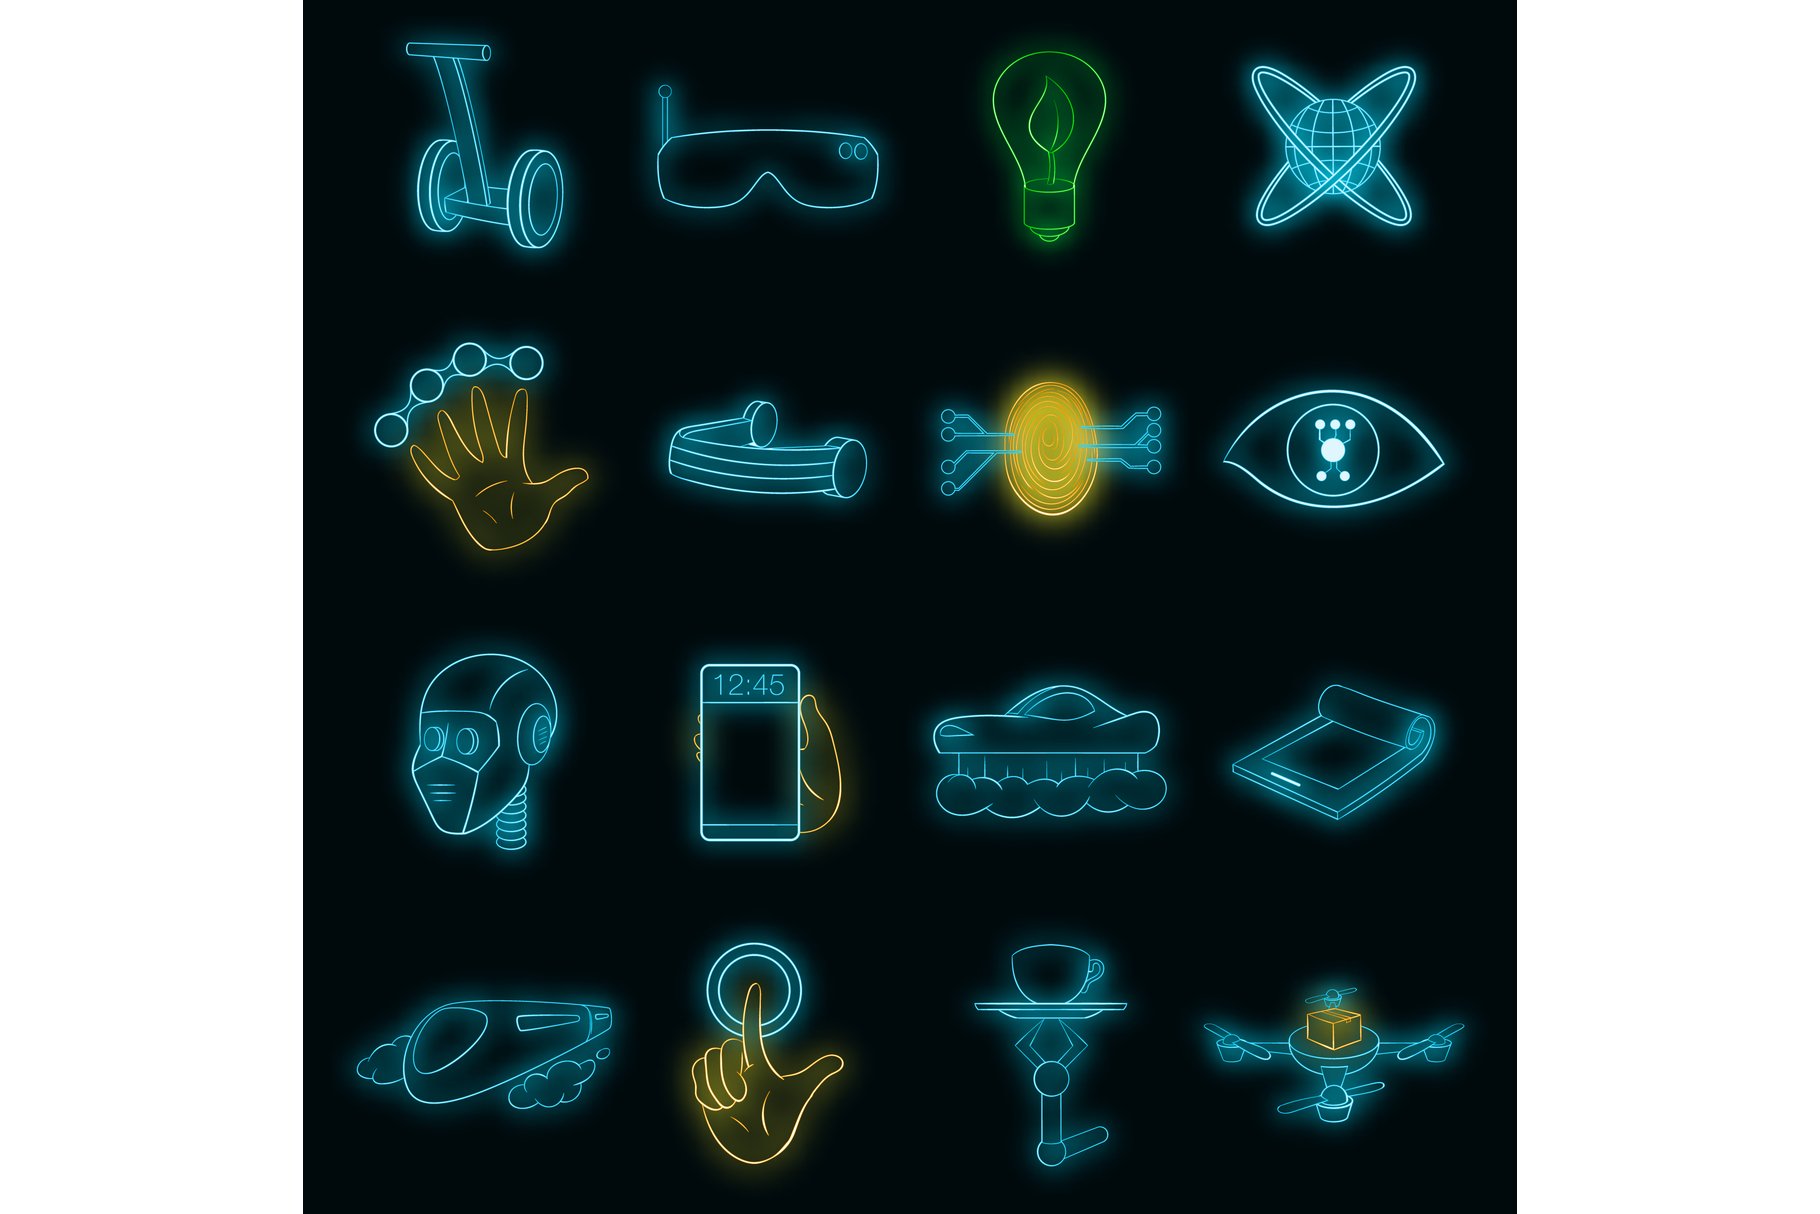 New technologies icons set vector cover image.